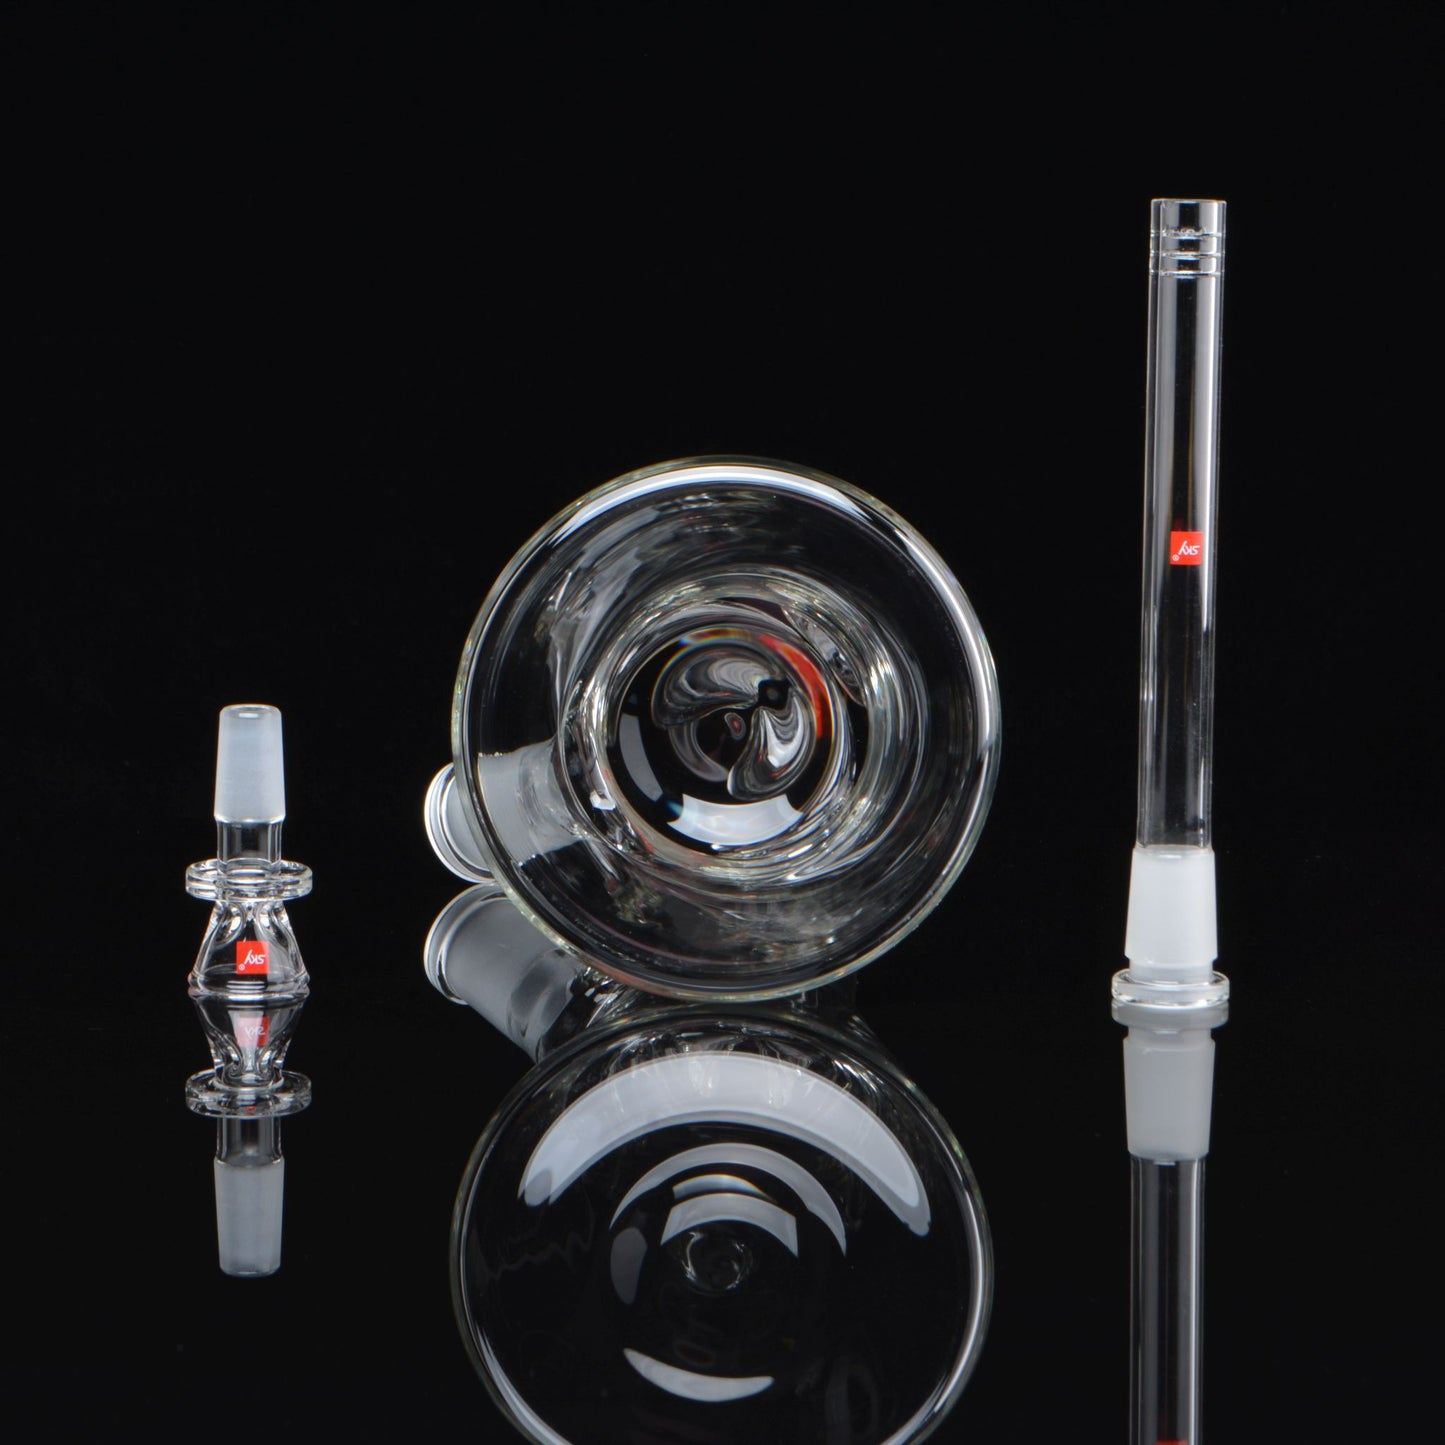 Beaker, clear glass, base, downstem, and bowl piece